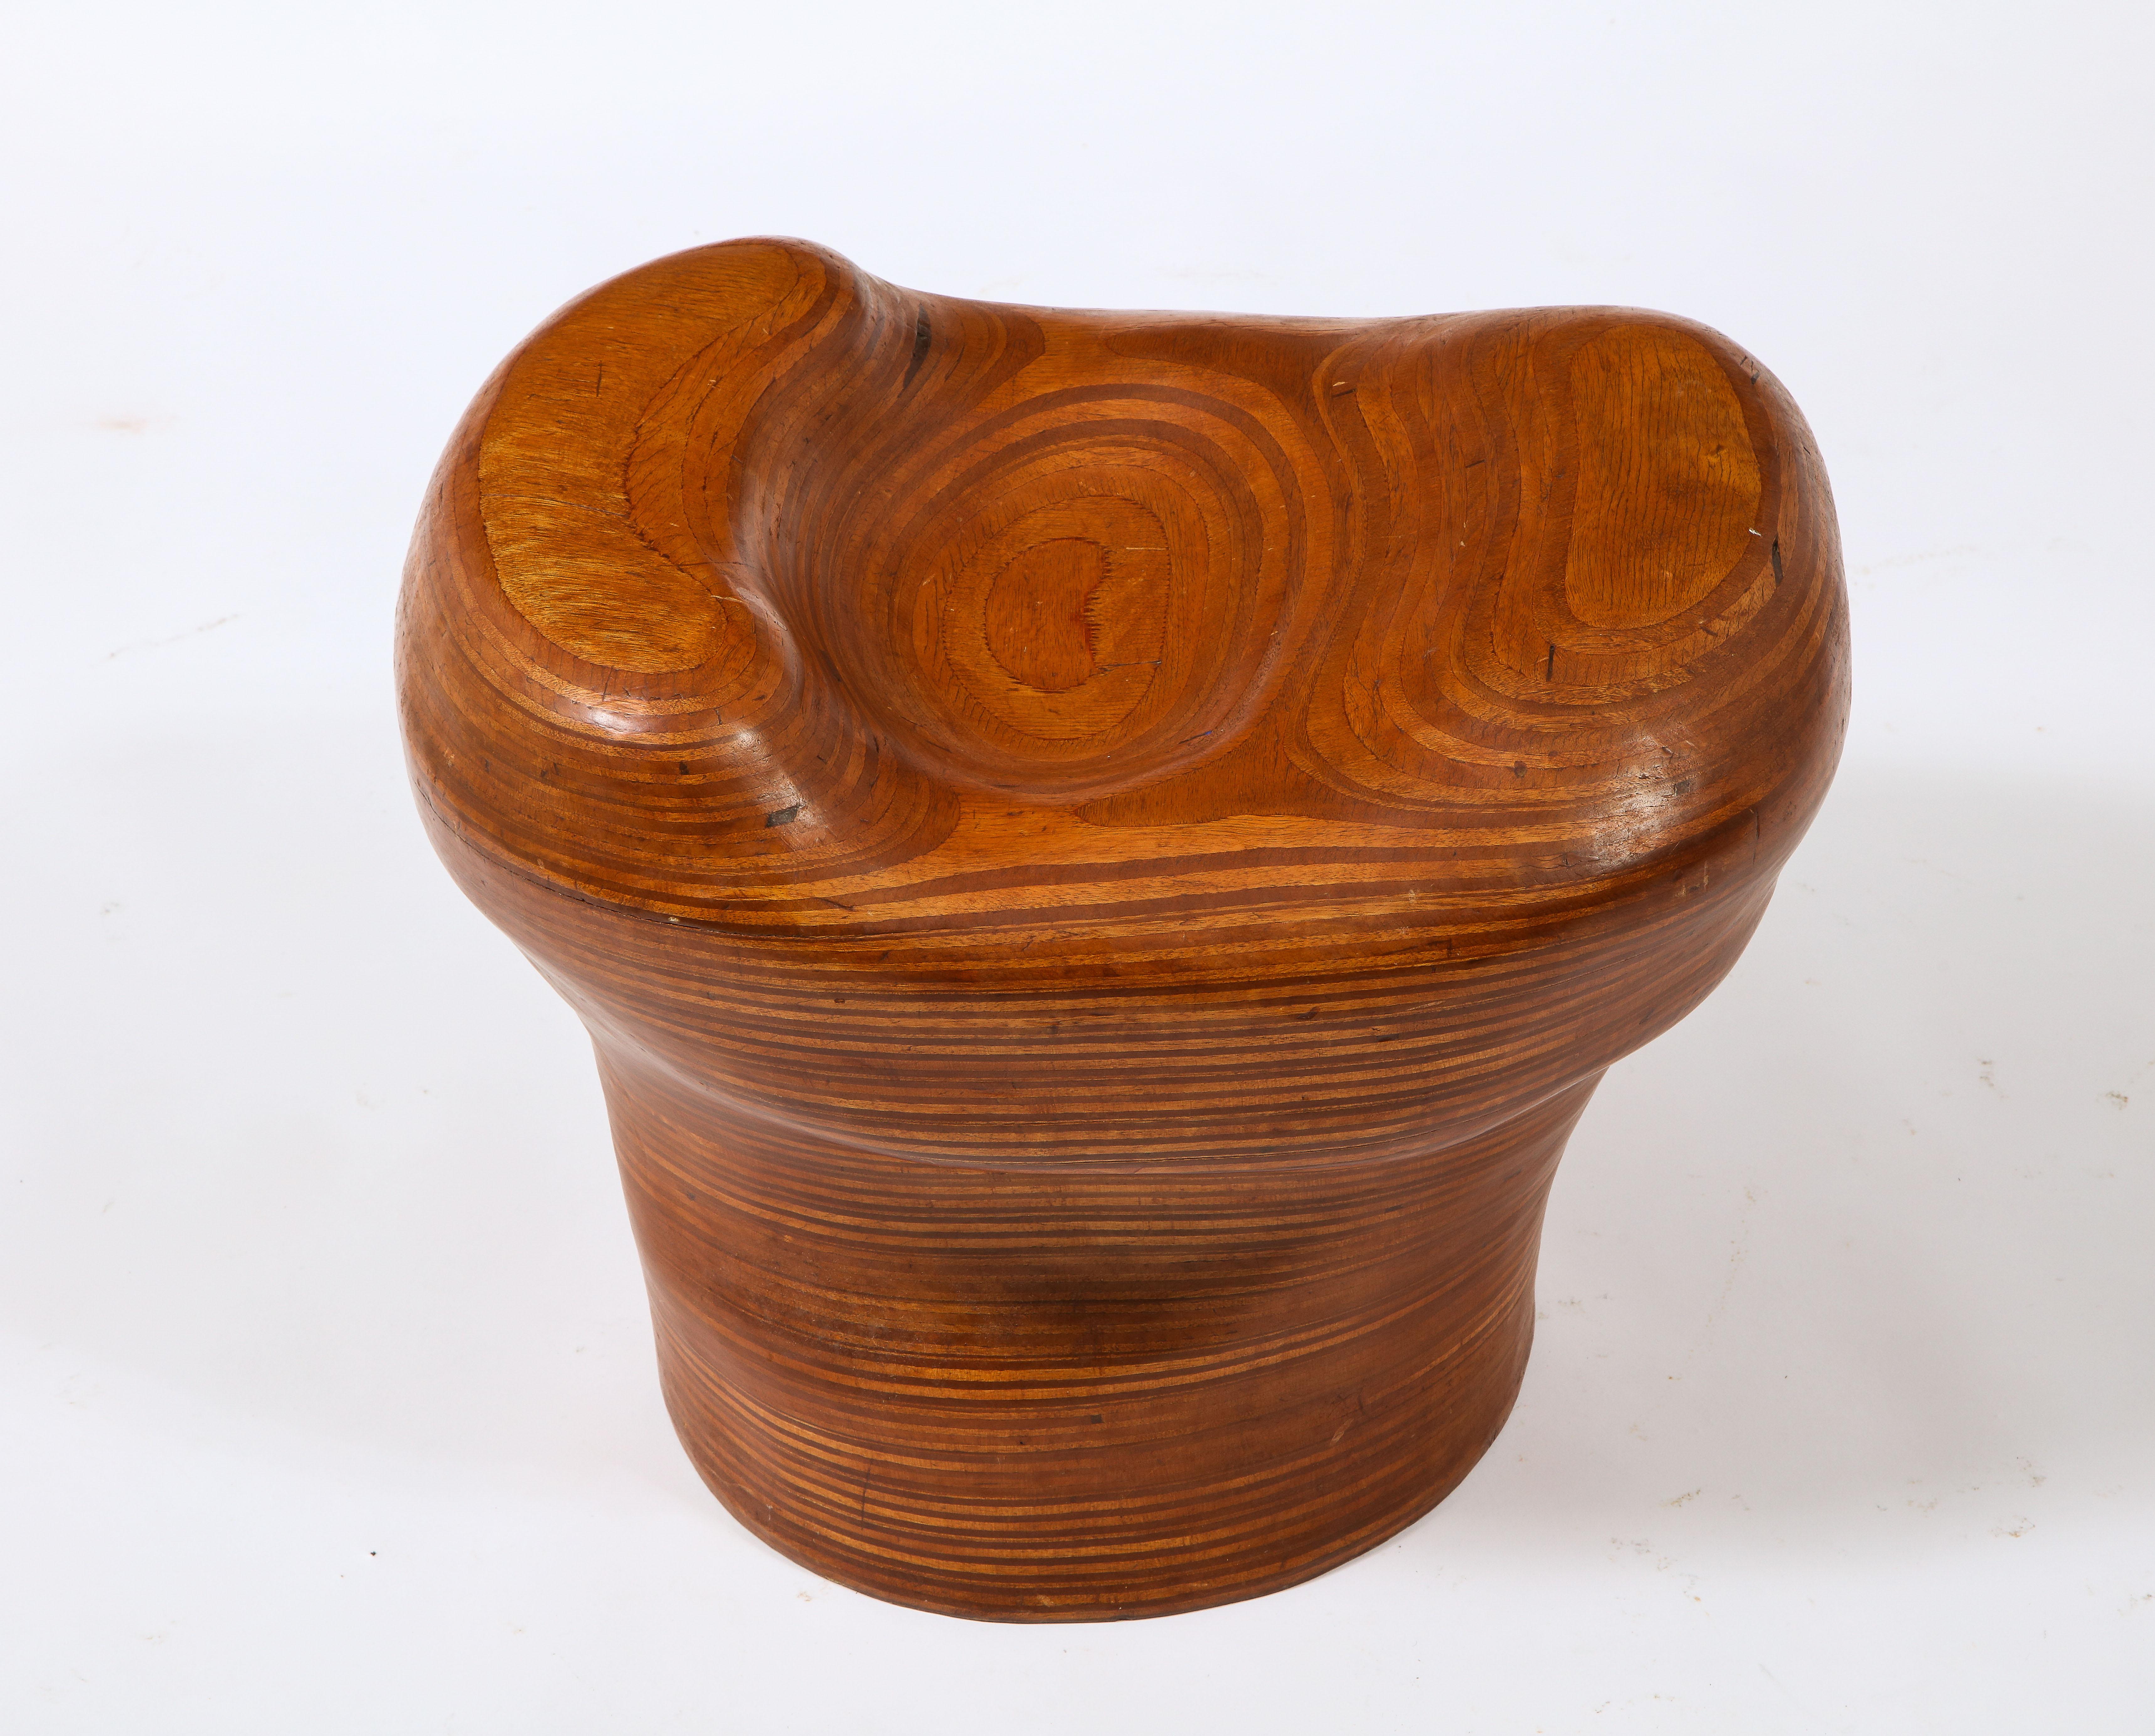 Denis Cospen Biomorphic Stool in Laminated Wood, France 1960's For Sale 5